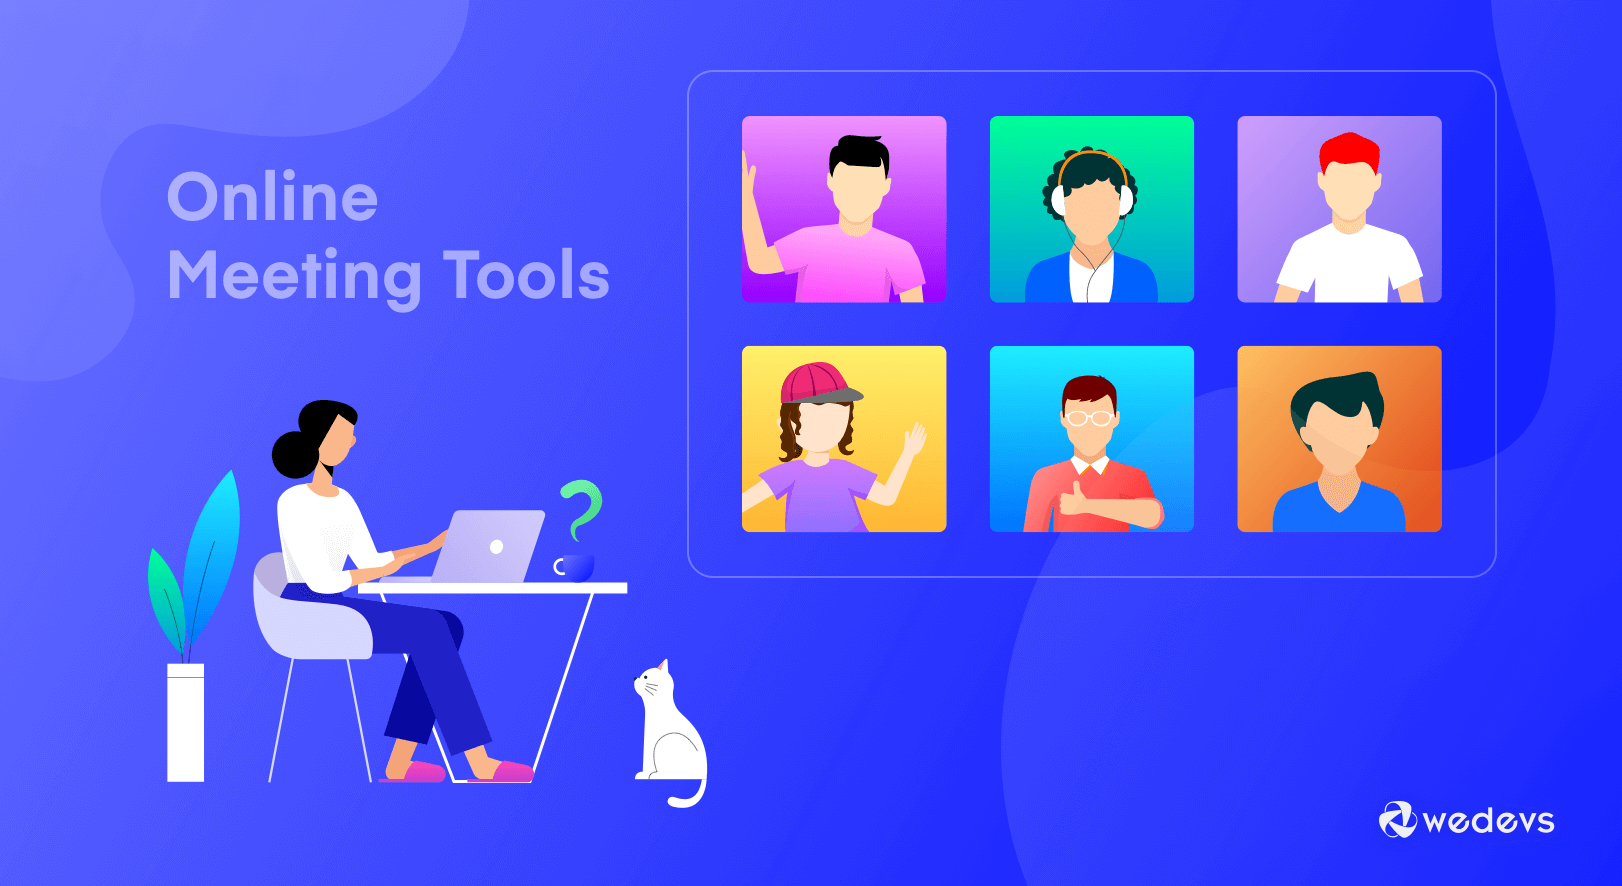 7 Free Online Meeting Tools: Which One to Choose for Your Team &#038; Why